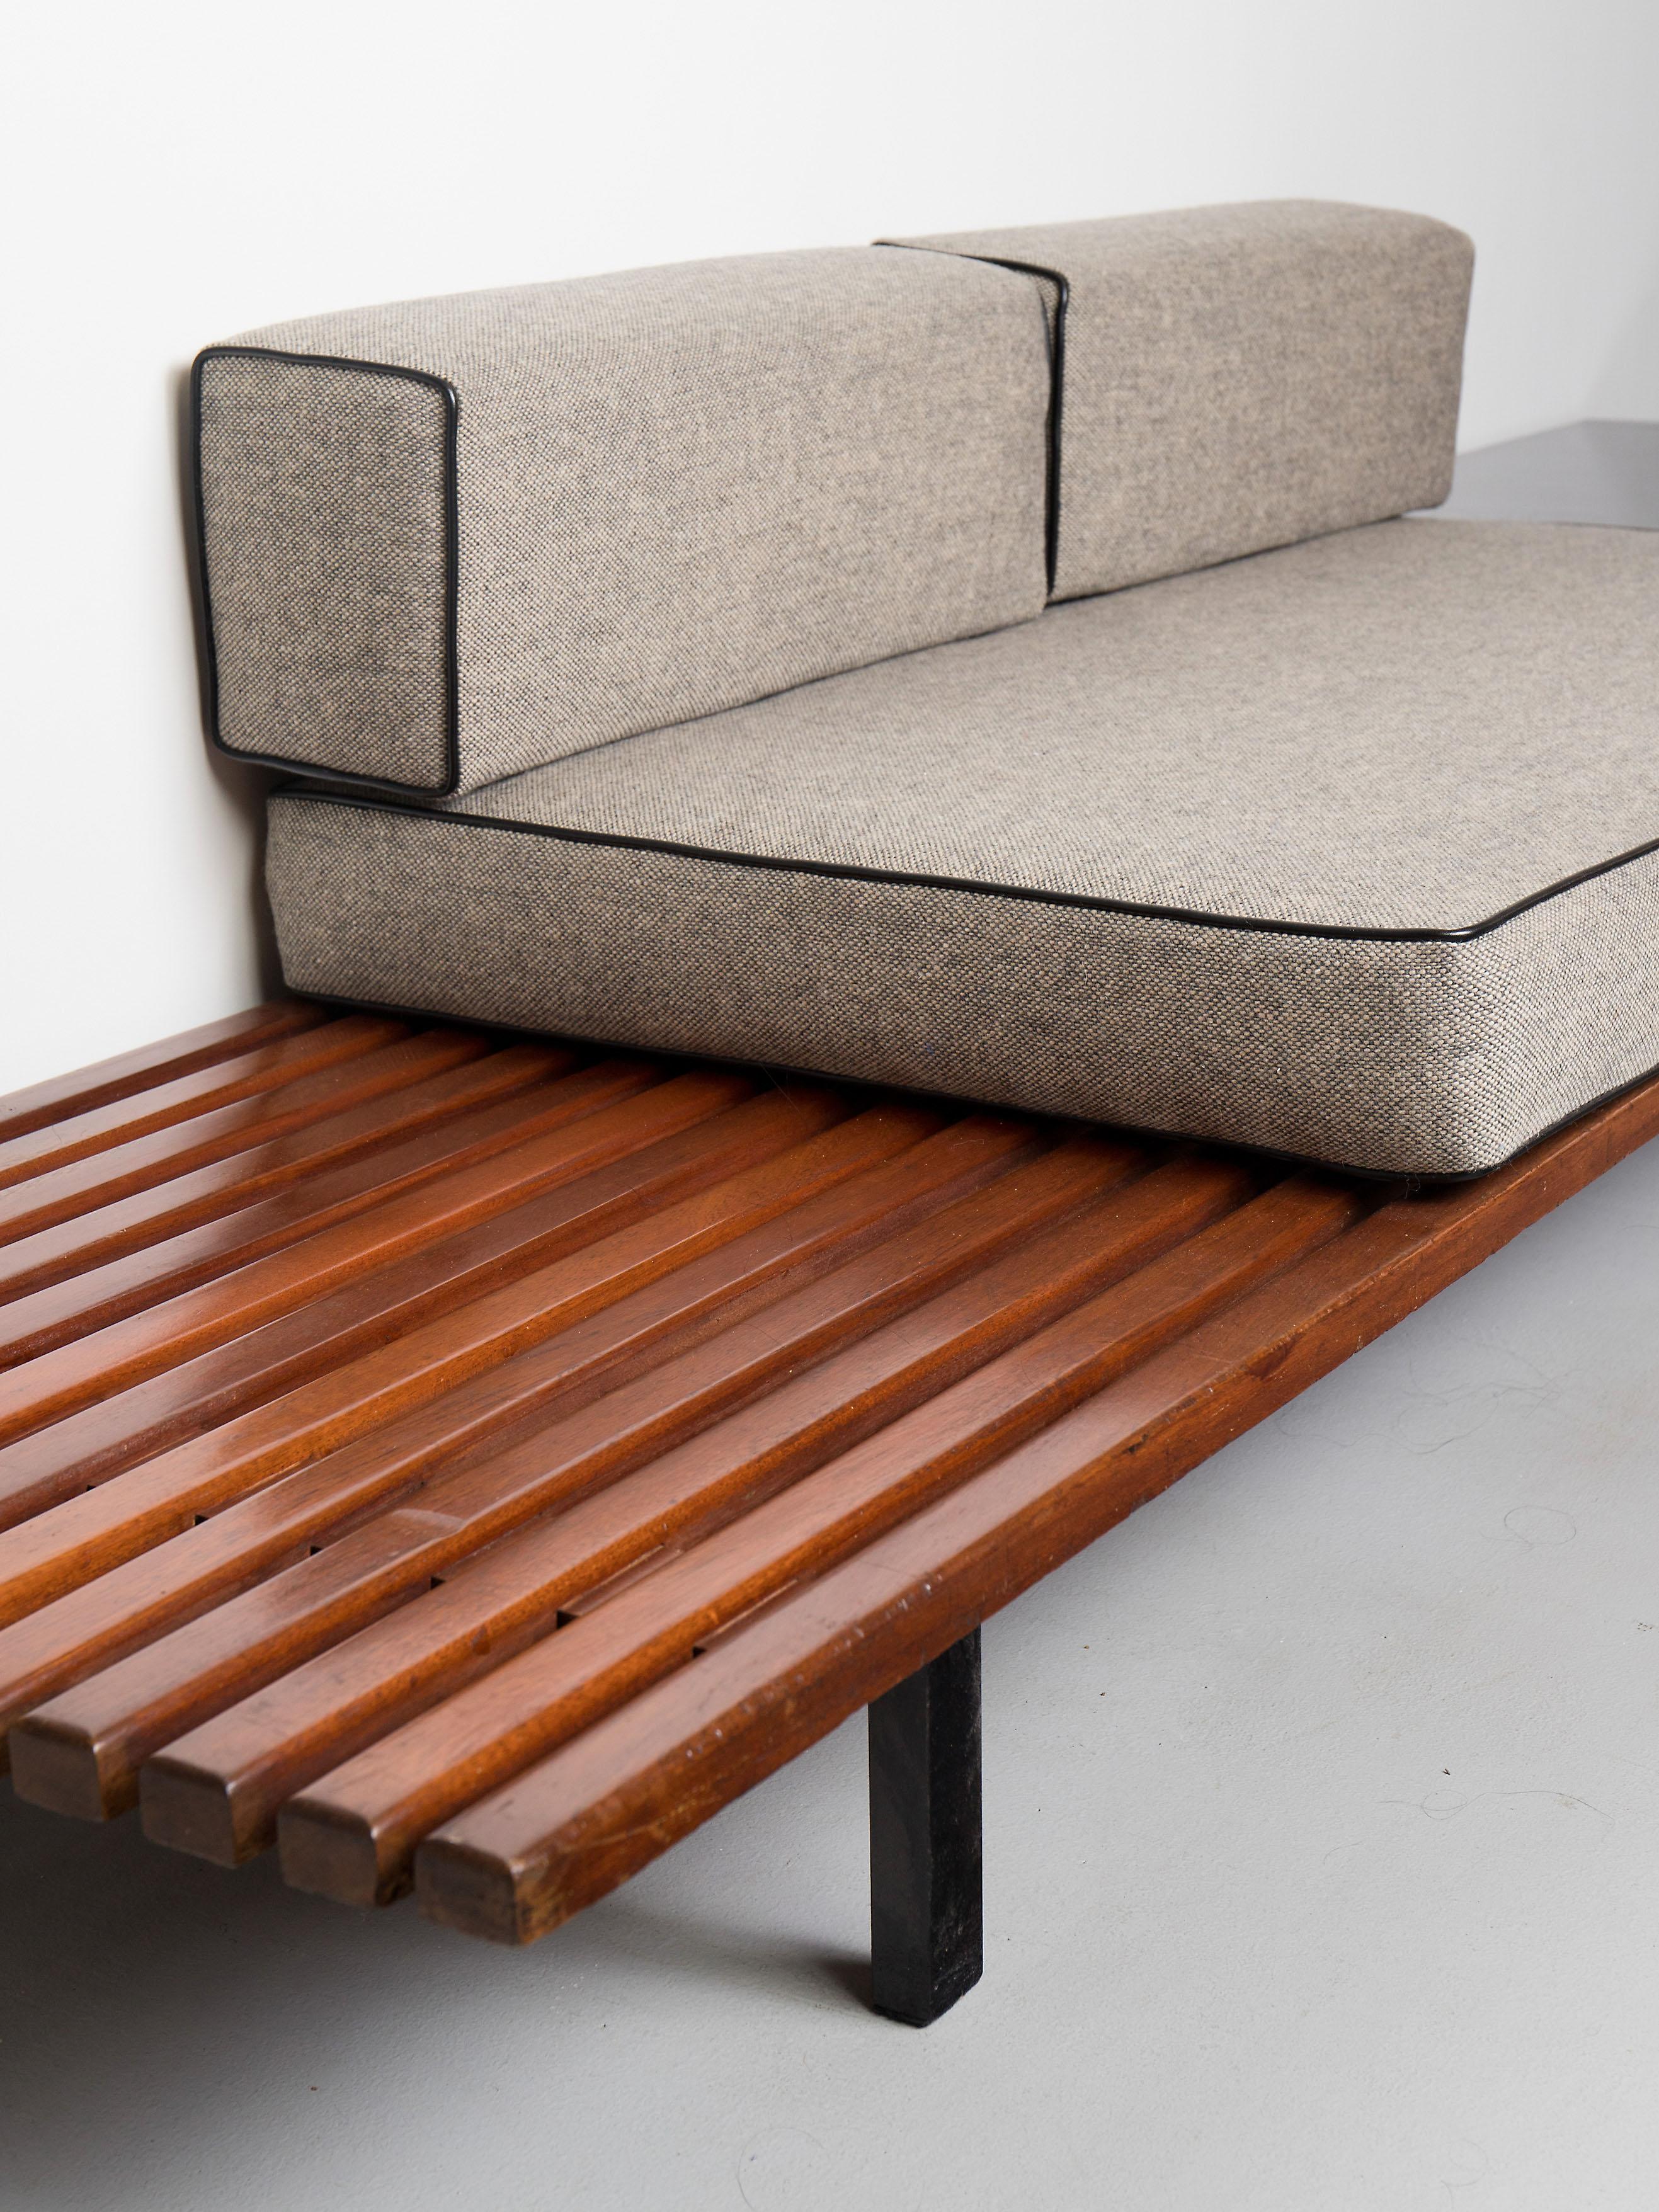 Large mahogany bench with drawer by Charlotte Perriand from Cansado, Mauritania, circa 1958.
Mahogany top has been gently cleaned, metal frame is in original condition and two - tone cushions are newly made.
  